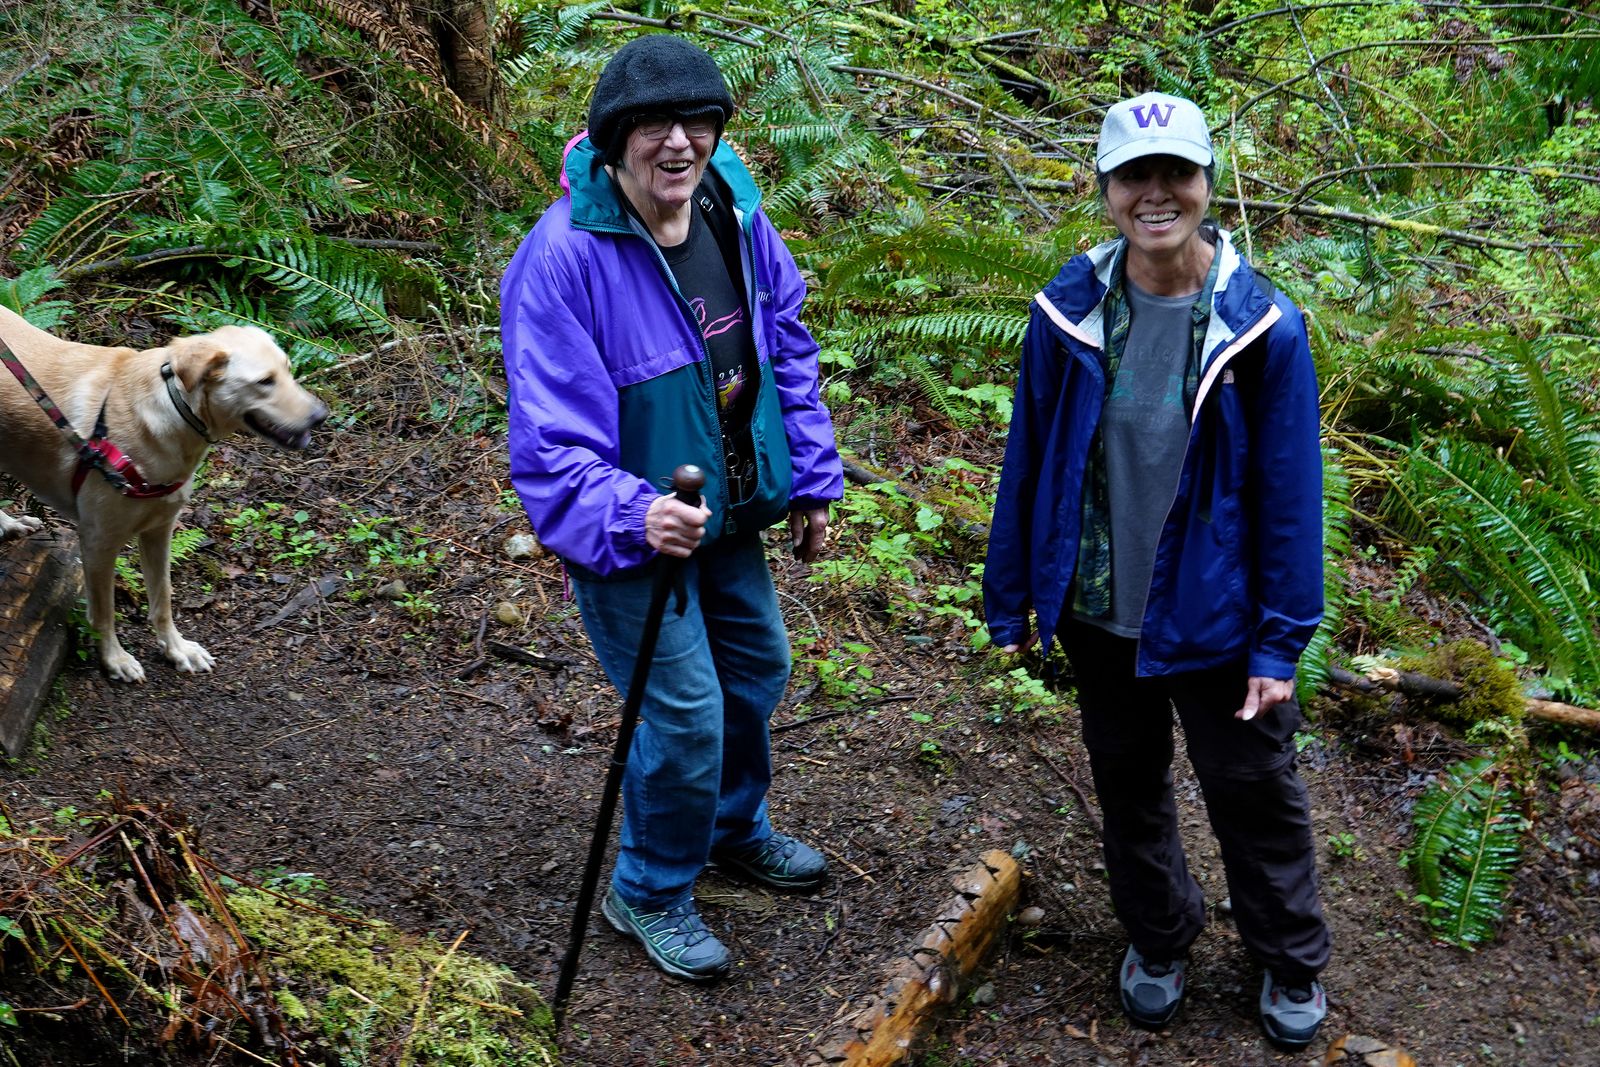  Alice on the left at 94 is our oldest hiker – she is my idol 